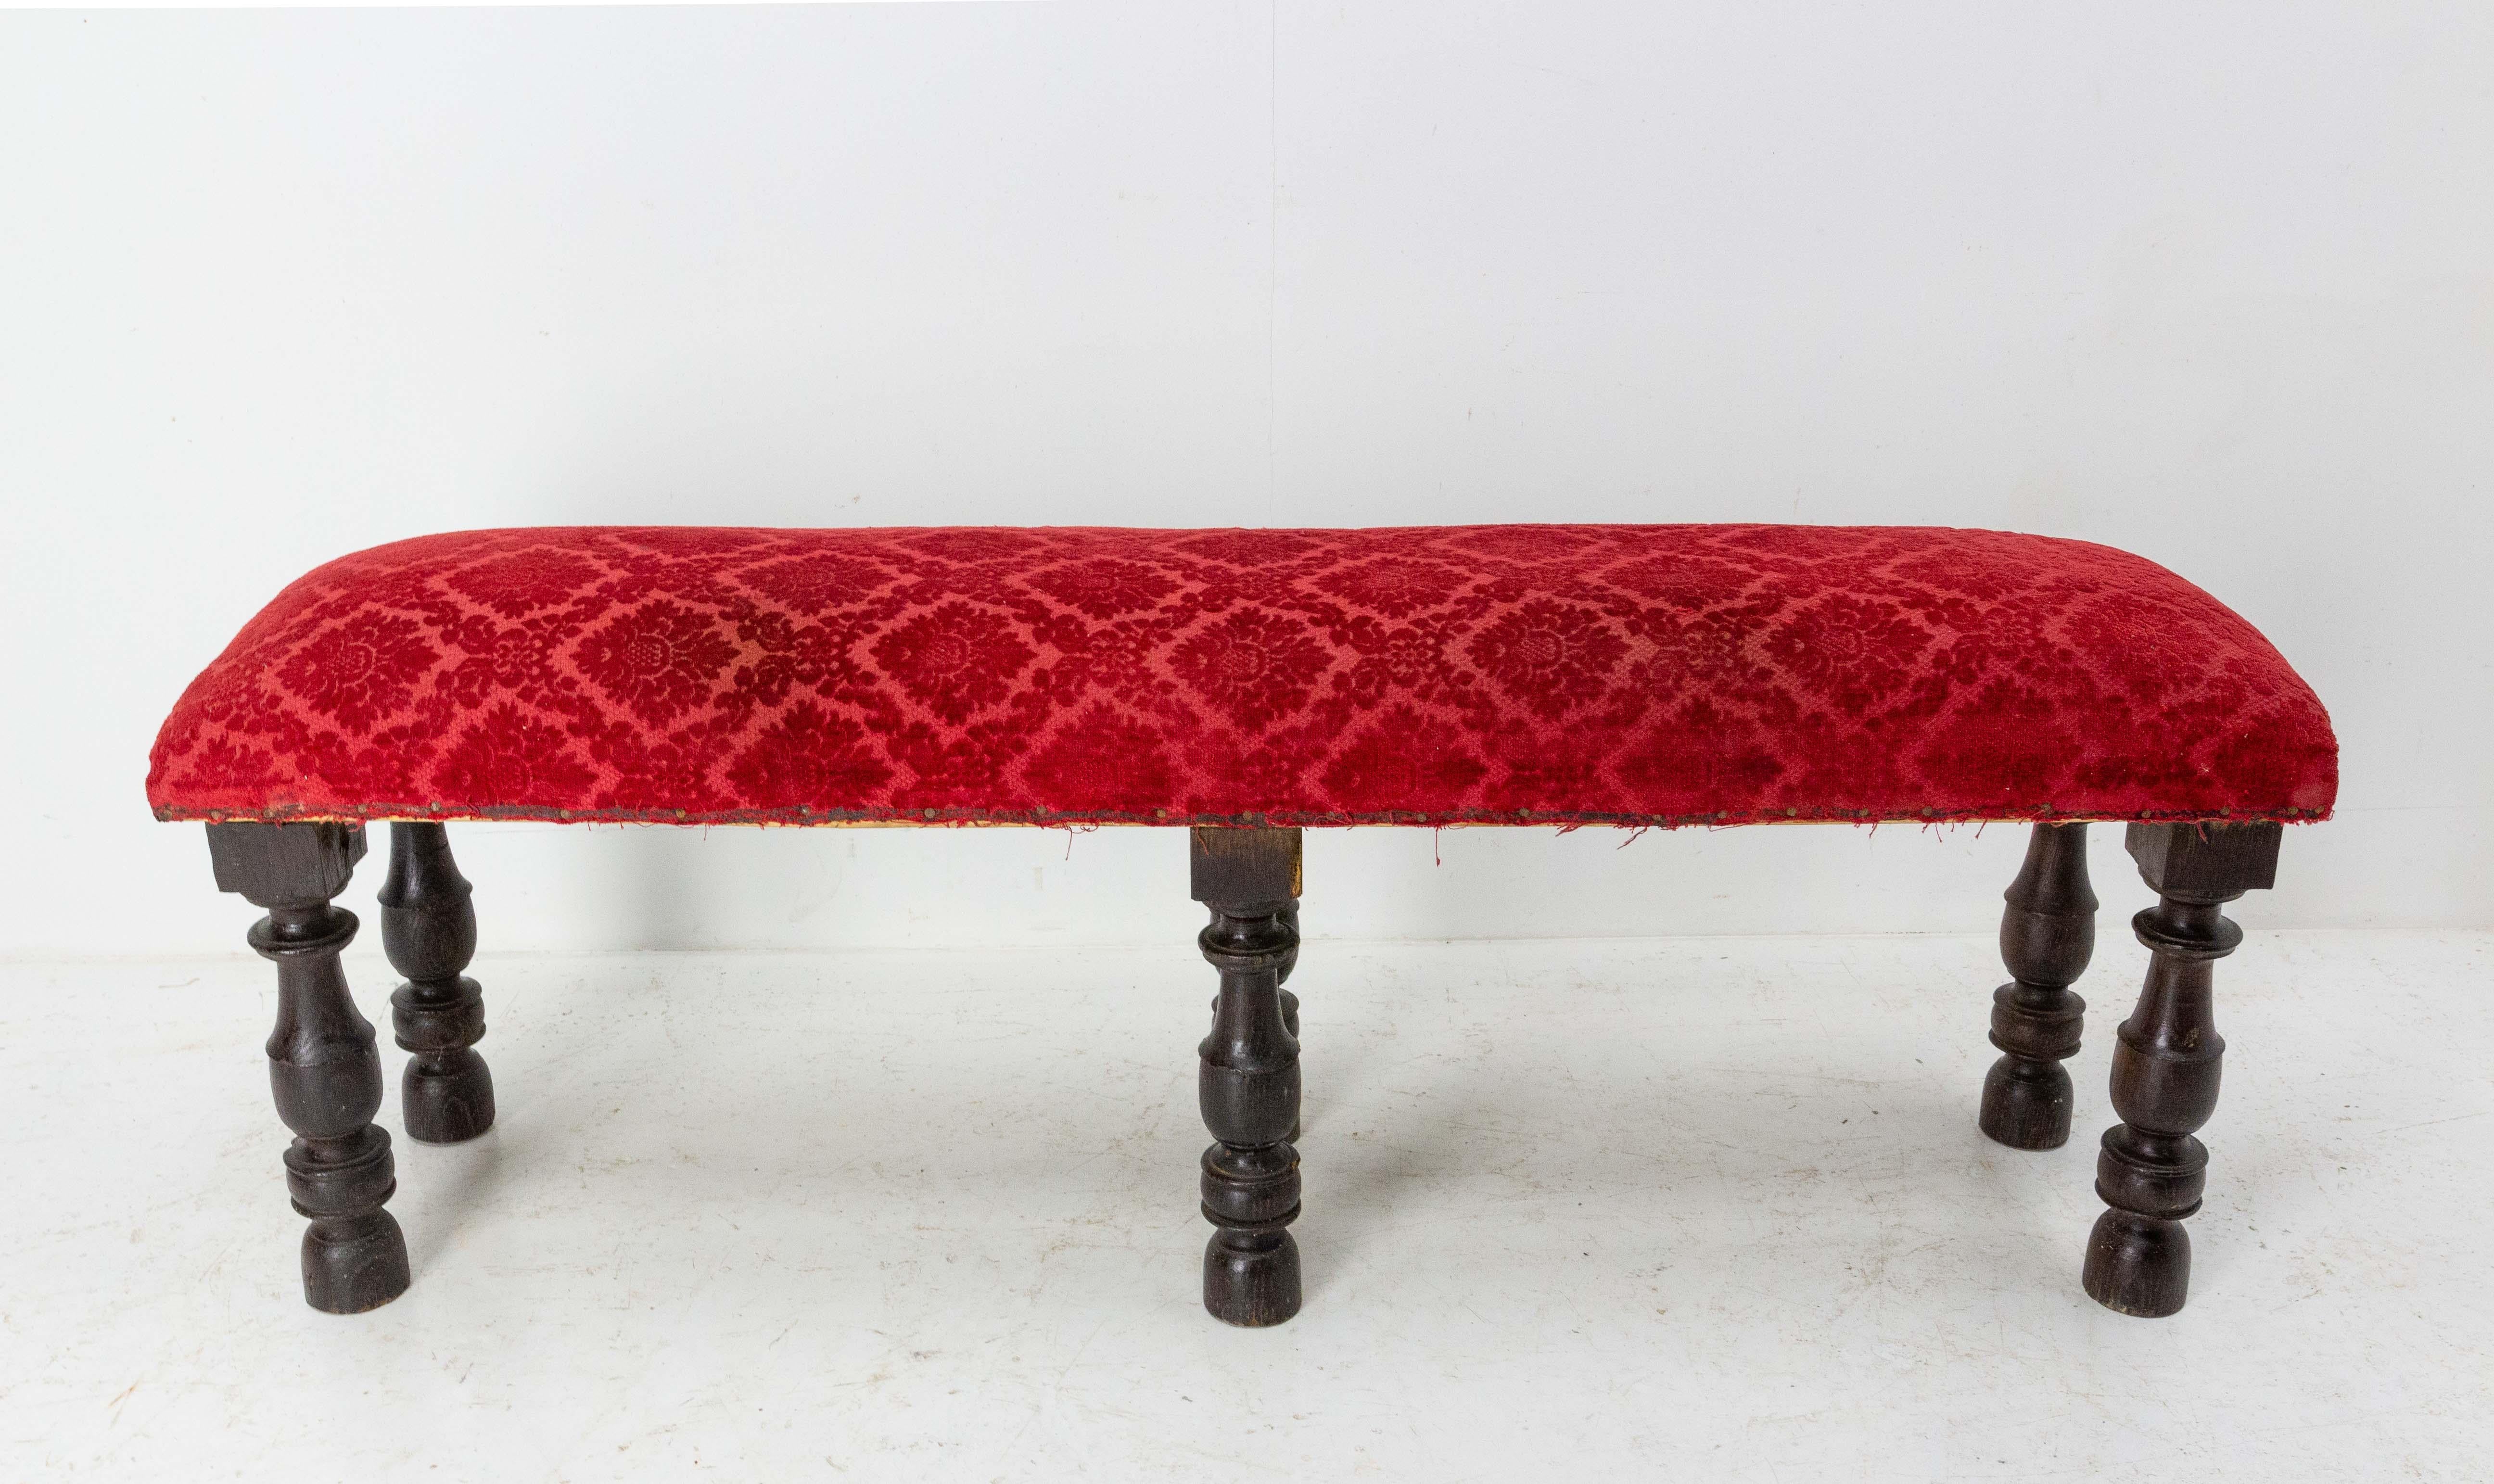 20th Century French Banquette Bench Chestnut and Upholstery, circa 1900